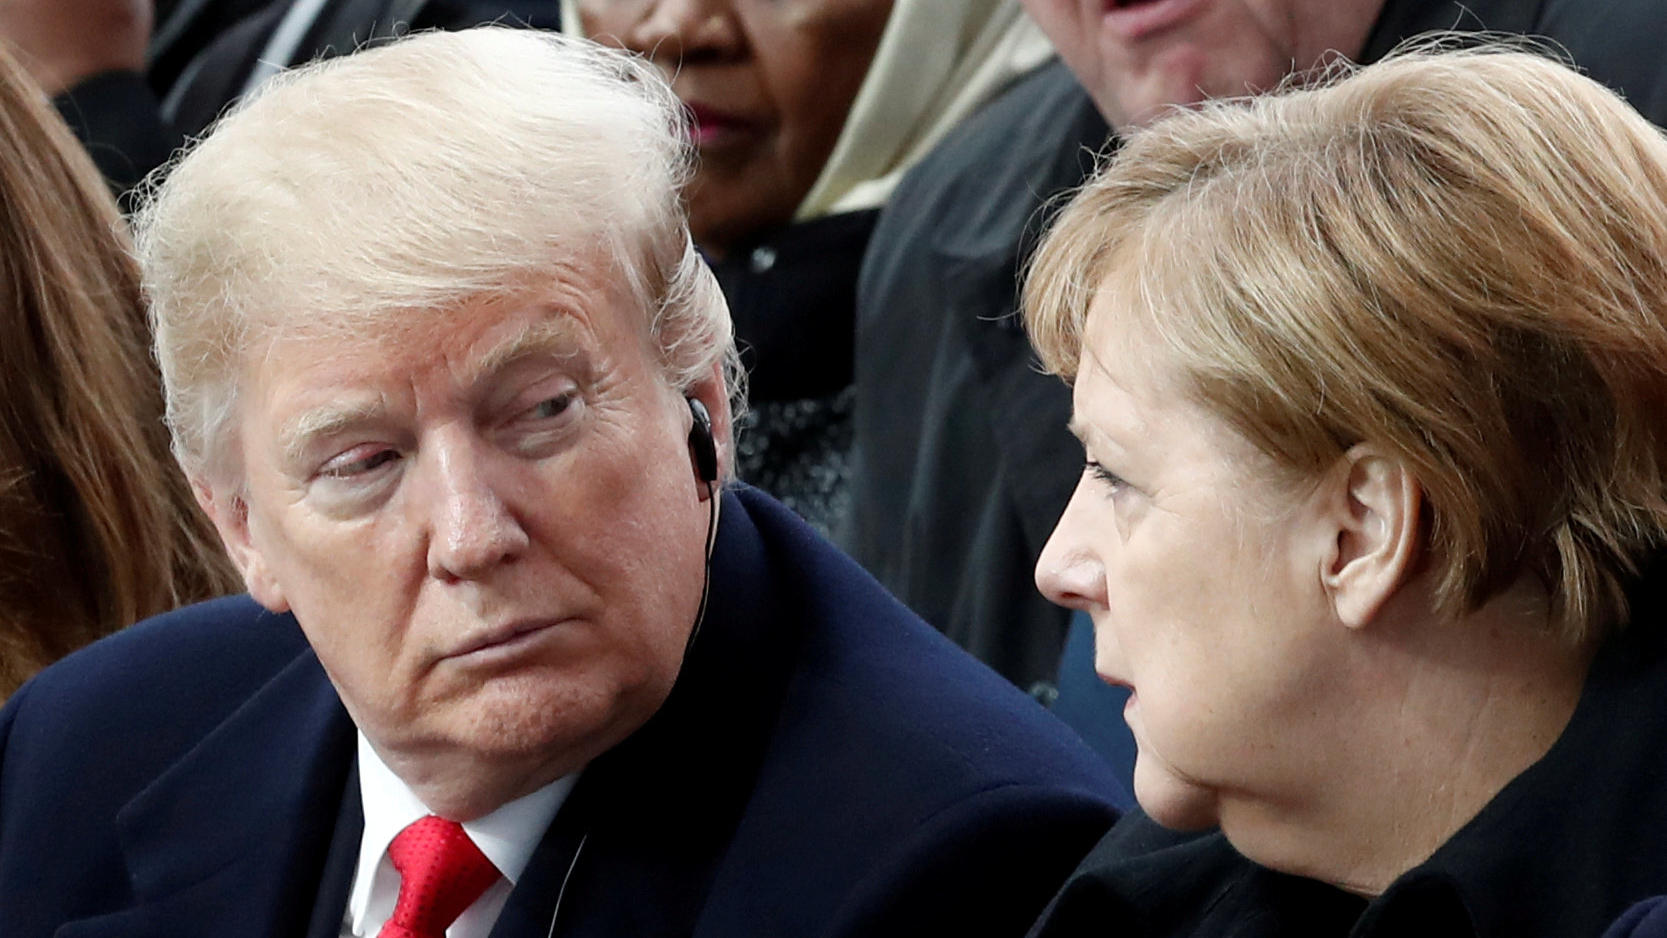 FILE PHOTO: German Chancellor Angela Merkel, and U.S. President Donald Trump attend a commemoration ceremony for Armistice Day, 100 years after the end of the First World War at the Arc de Triomphe in Paris, France, November 11, 2018.  REUTERS/Benoit